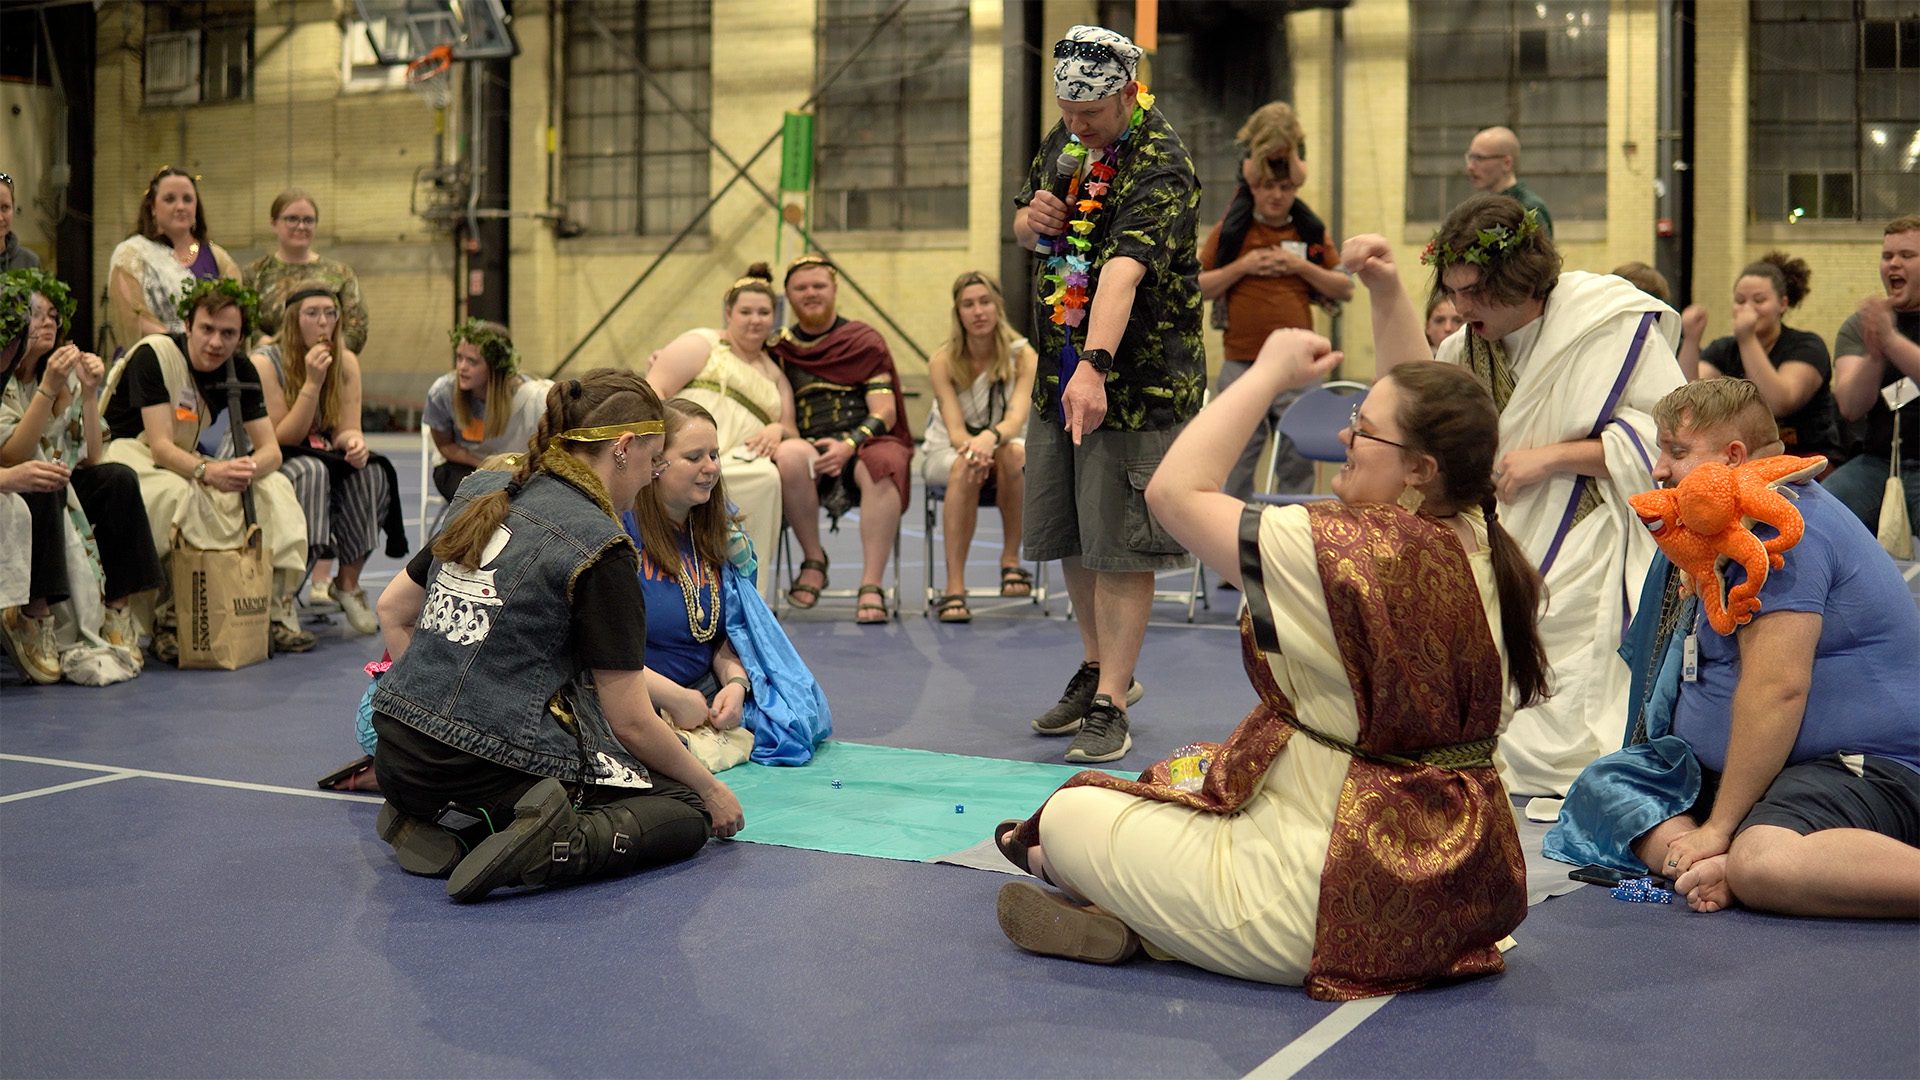 A costumed man points at players rolling dice on a cloth laid out on the floor.